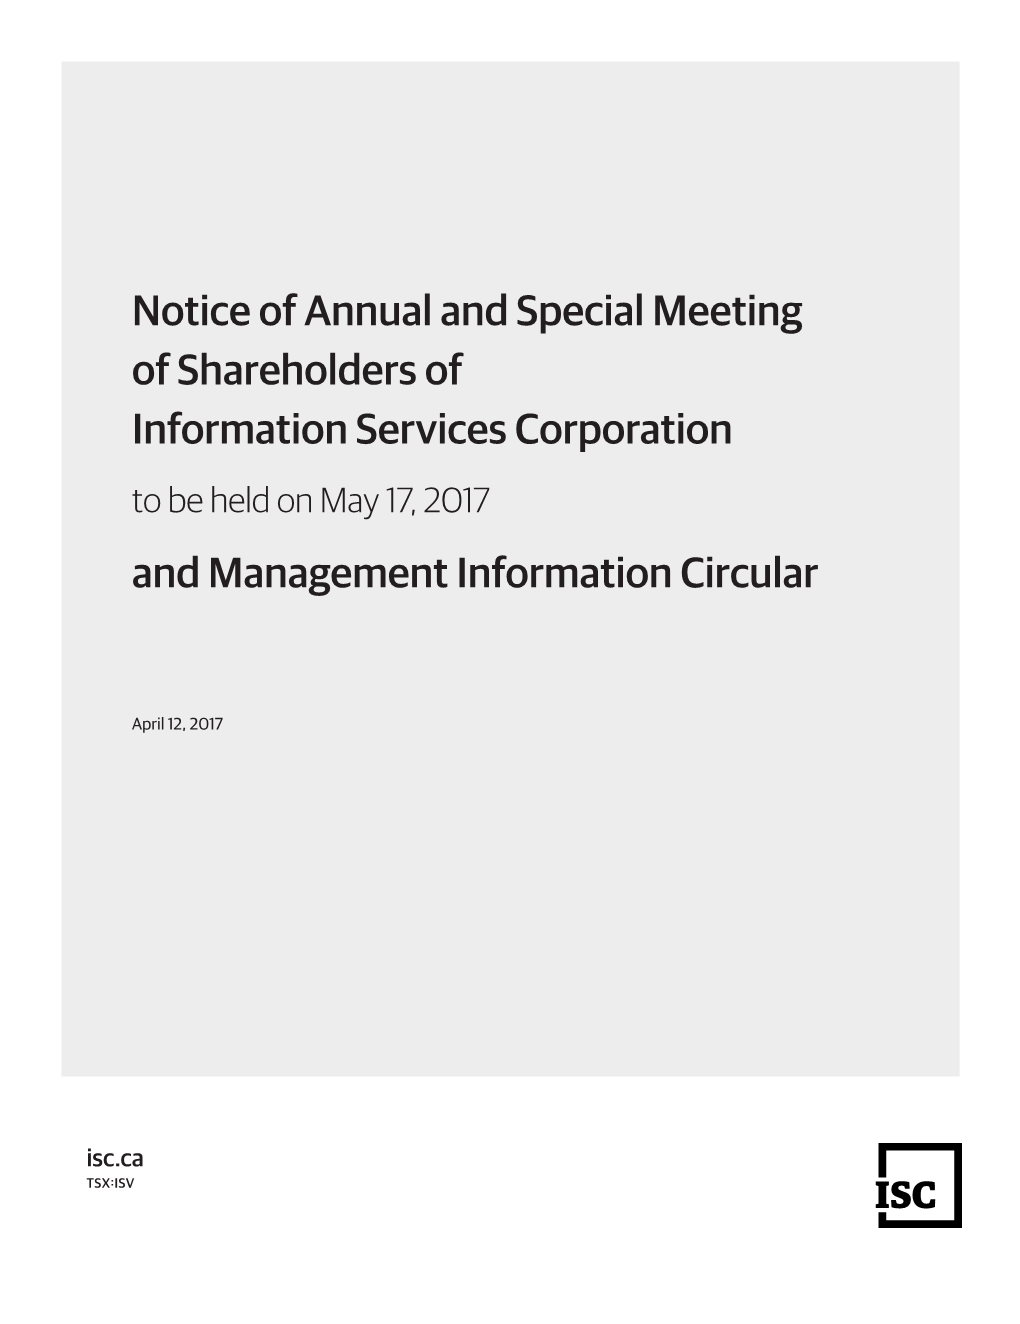 Notice of Annual and Special Meeting of Shareholders of Information Services Corporation to Be Held on May 17, 2017 and Management Information Circular